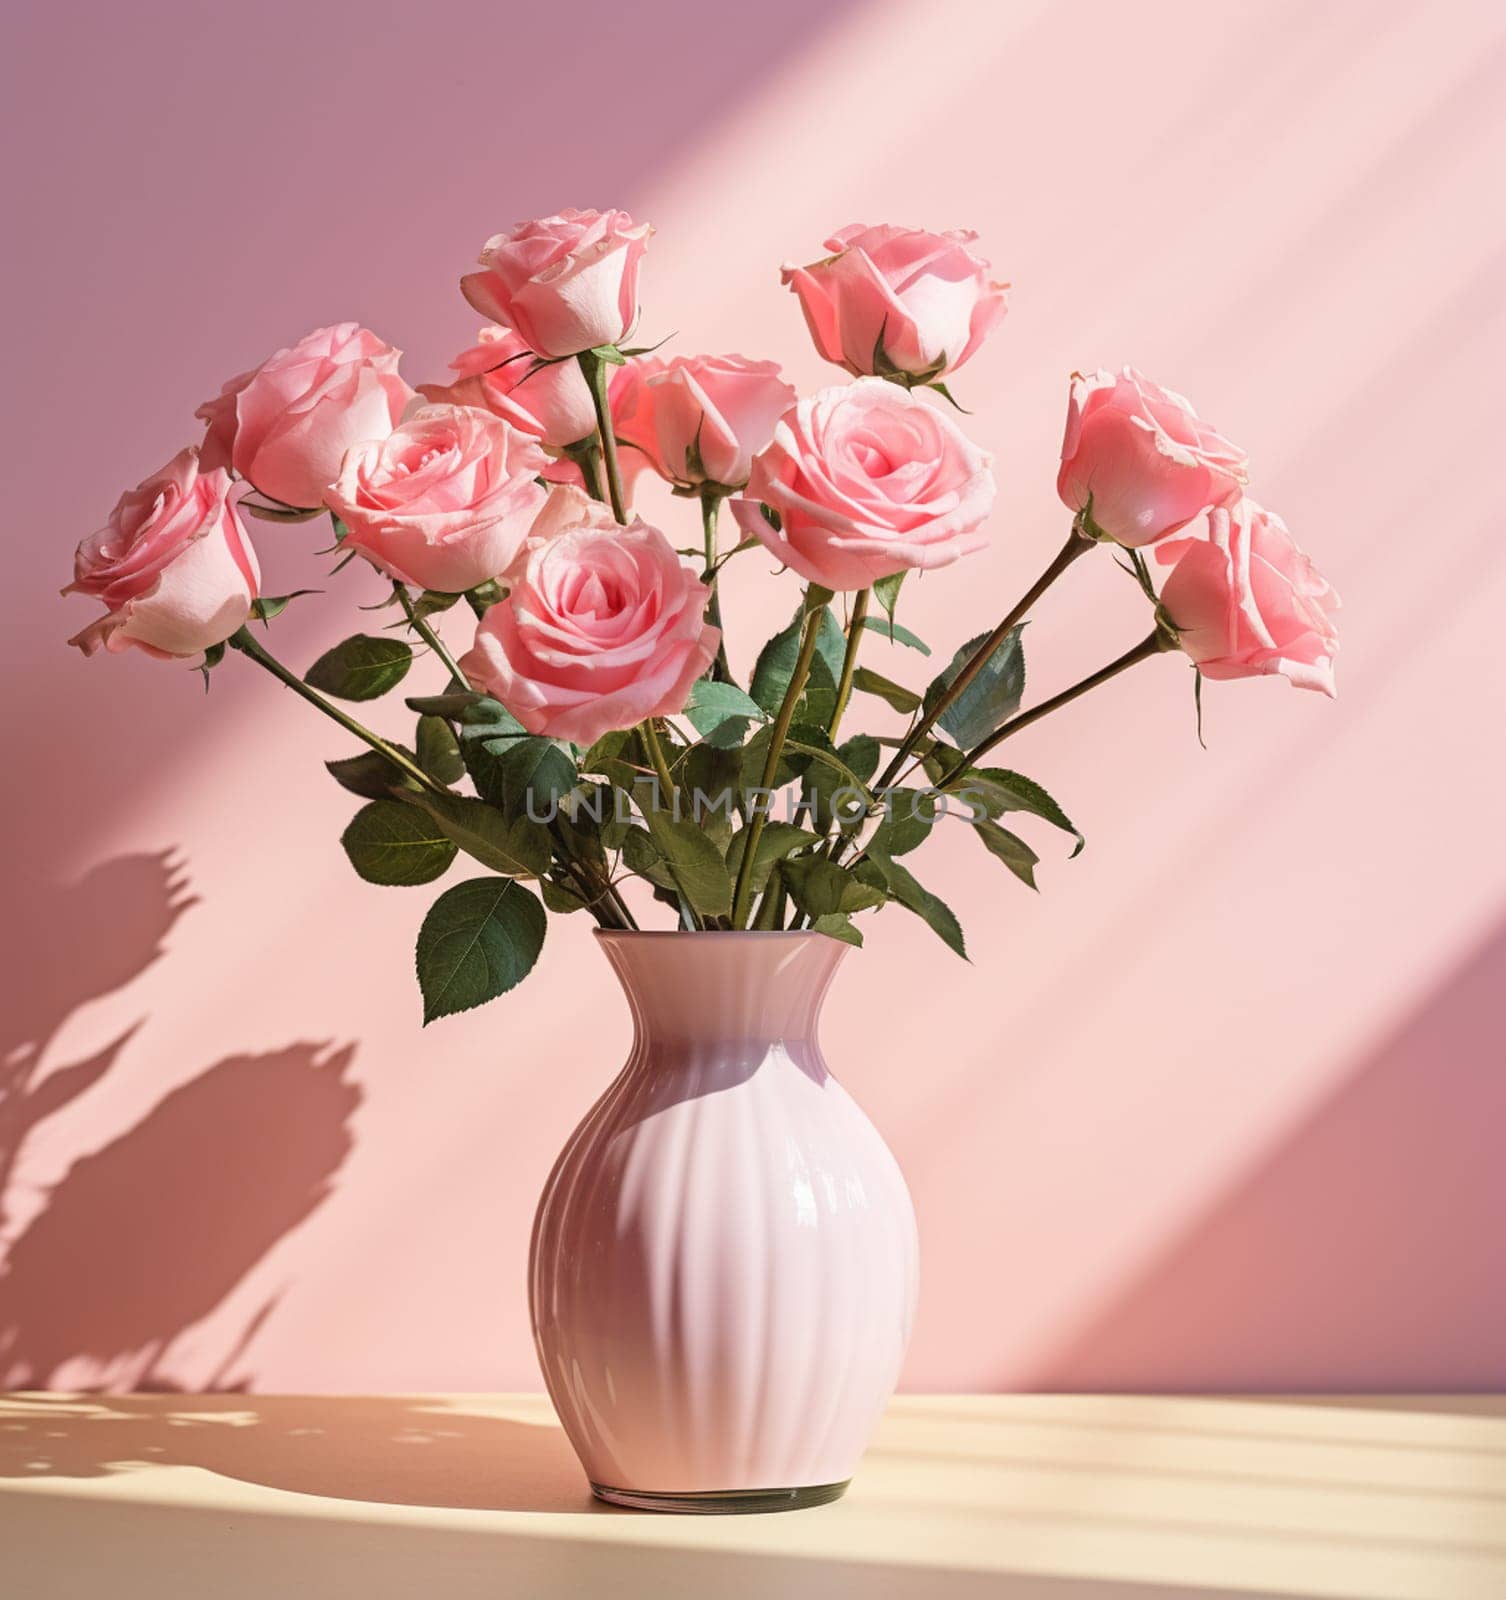 The bouquet of pink roses in a glass vase. High quality photo